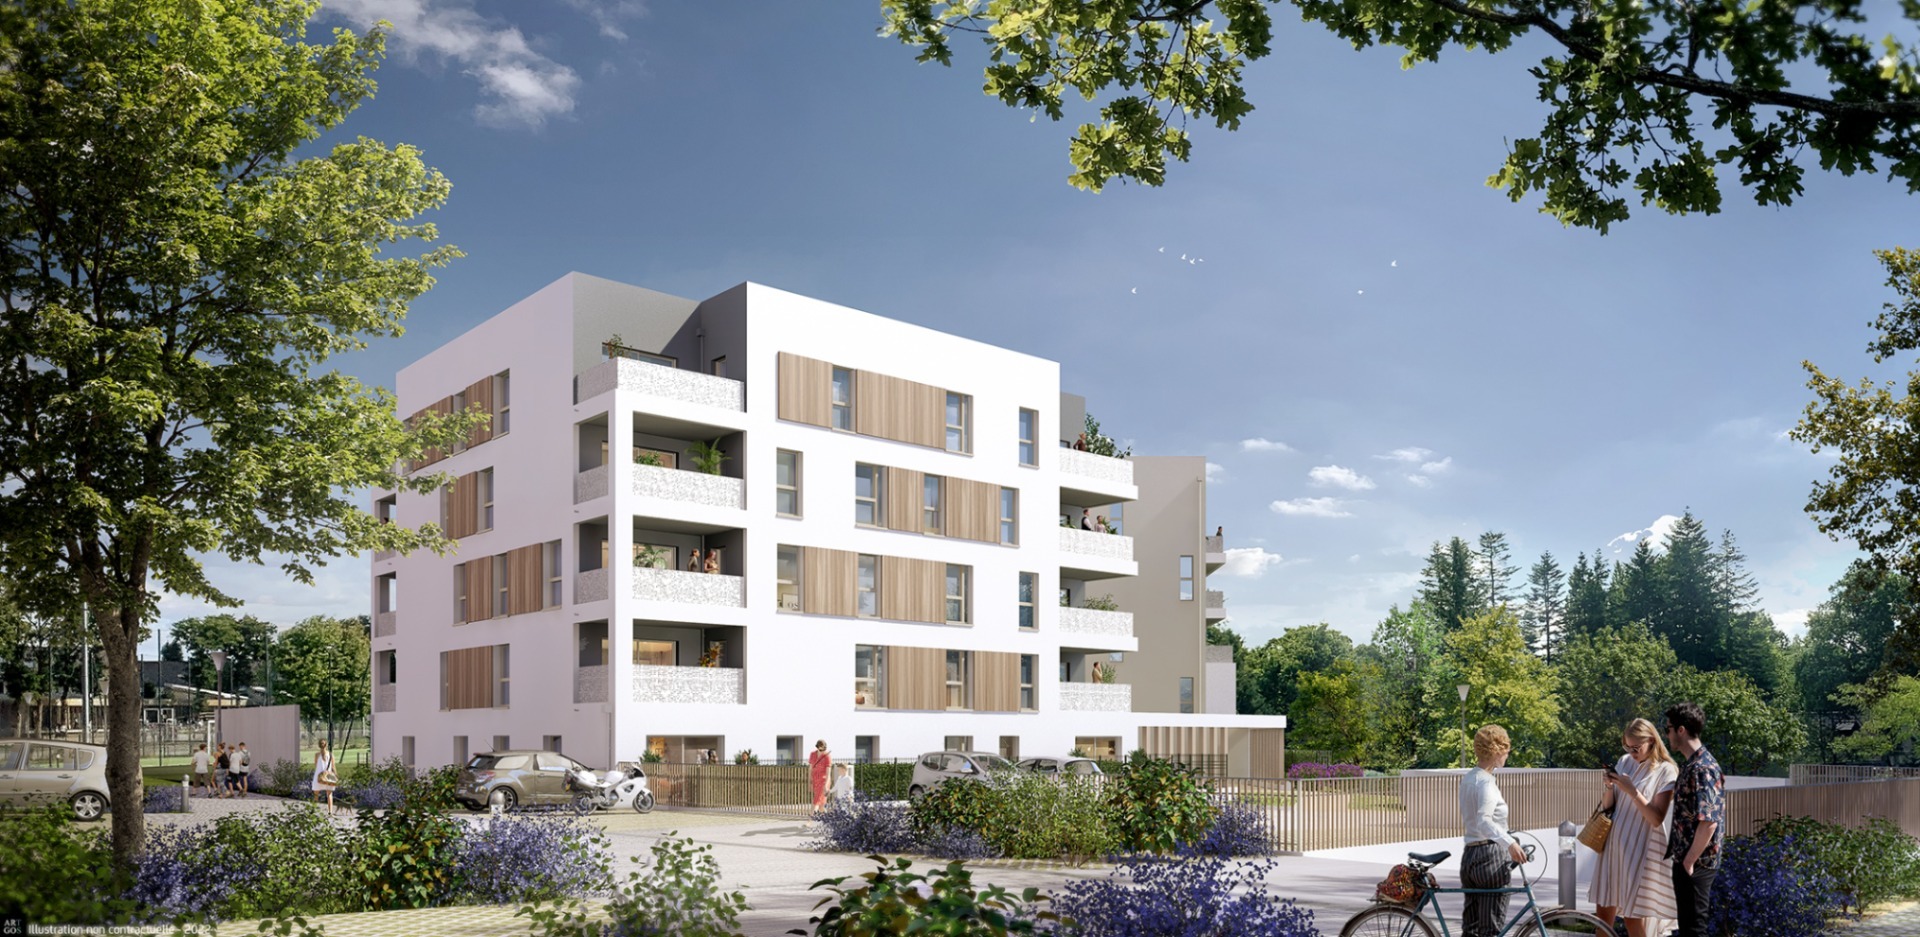 Programme immobilier neuf NATURE